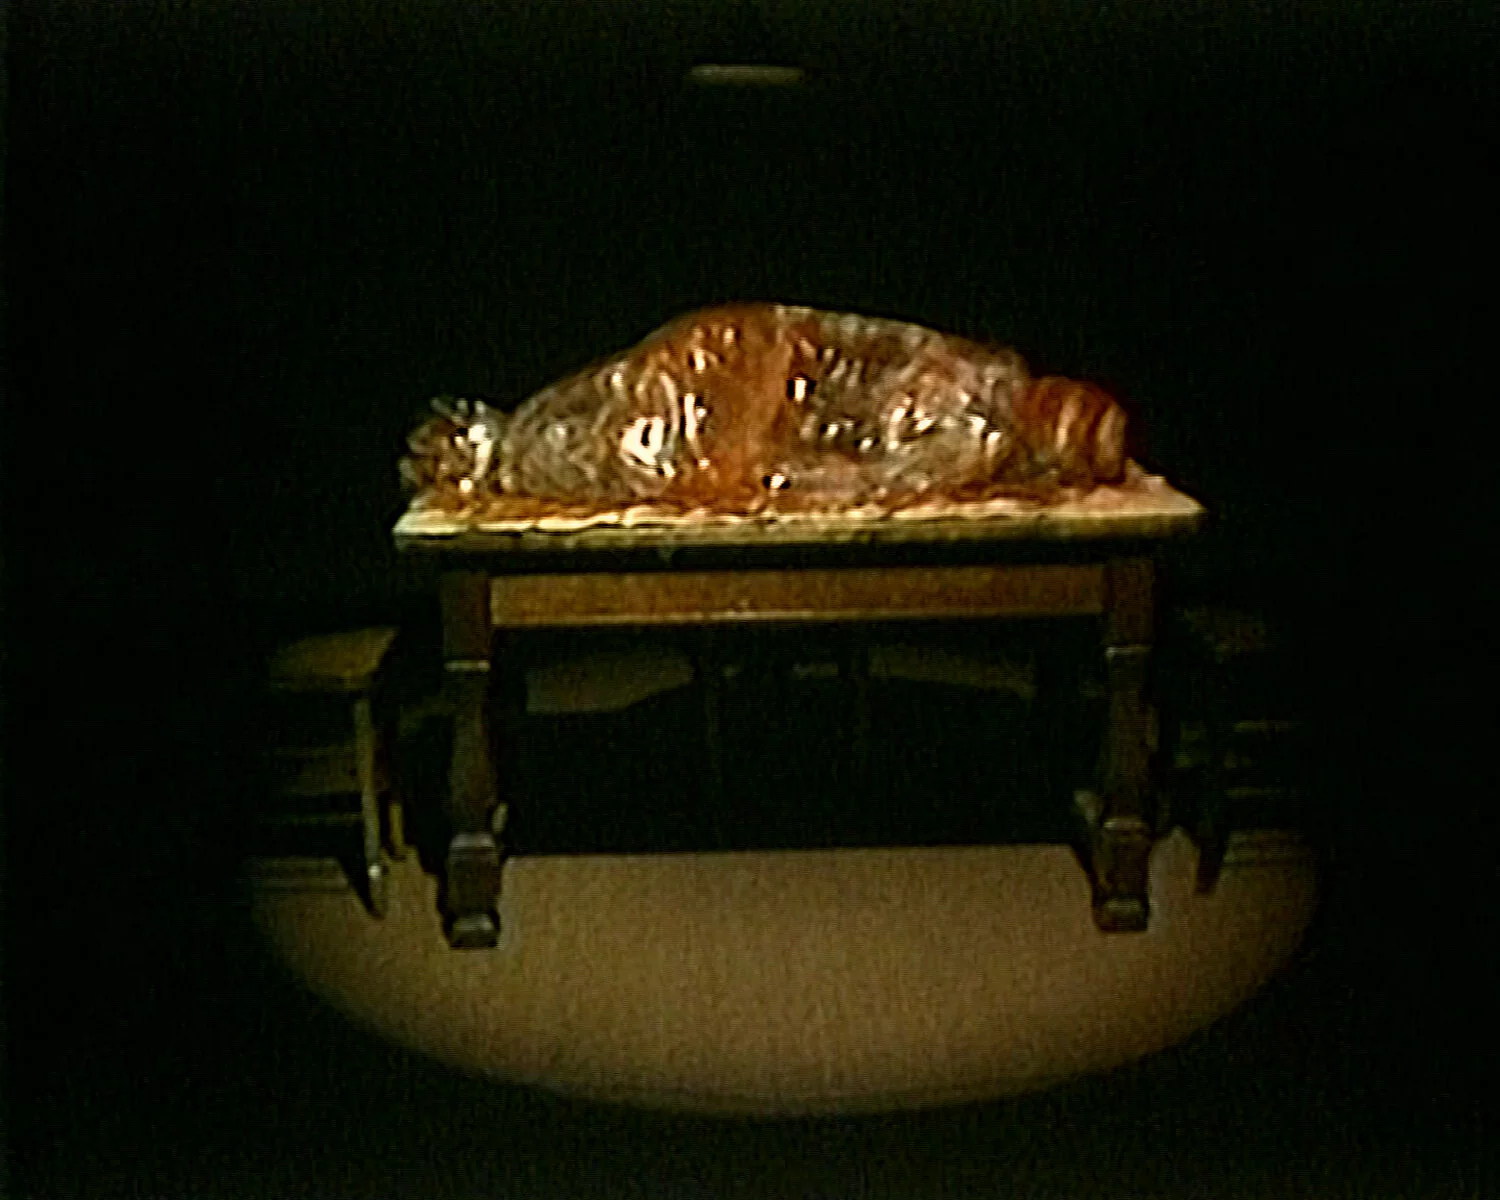 Still image of color video.